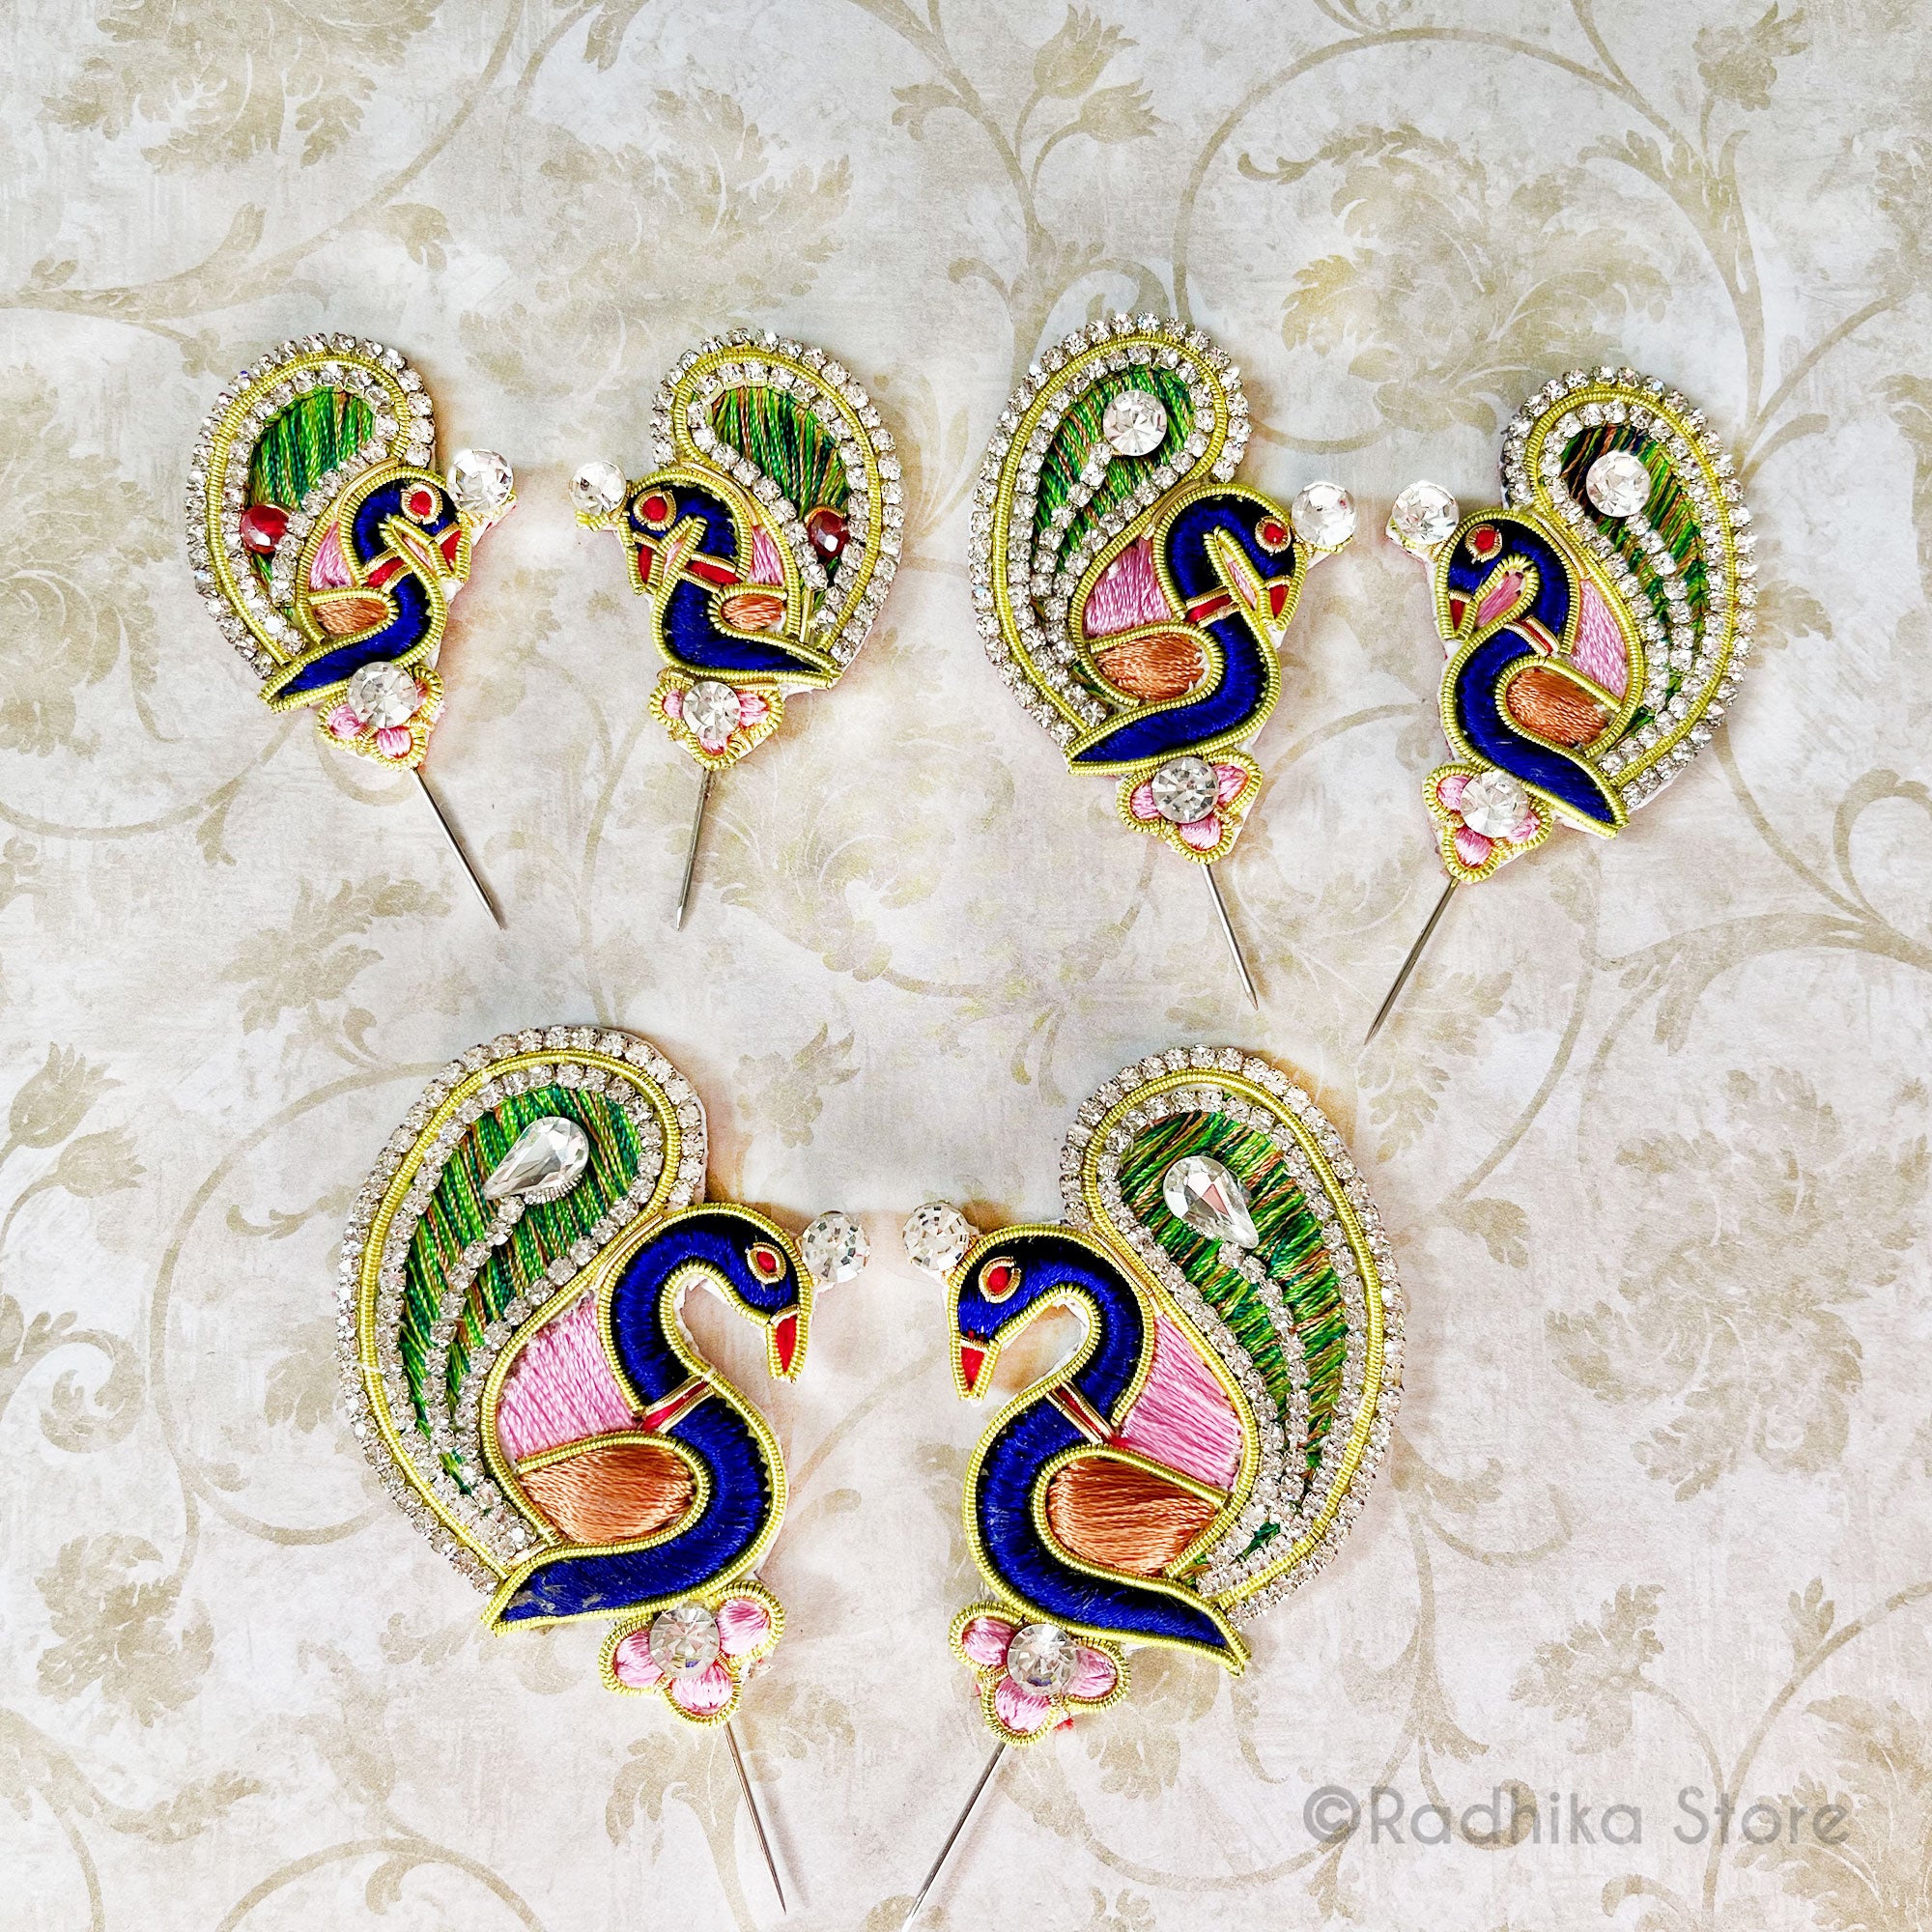 Adorning Peacocks with Jeweled Head - Embroidery Turban Pins - Set of 2